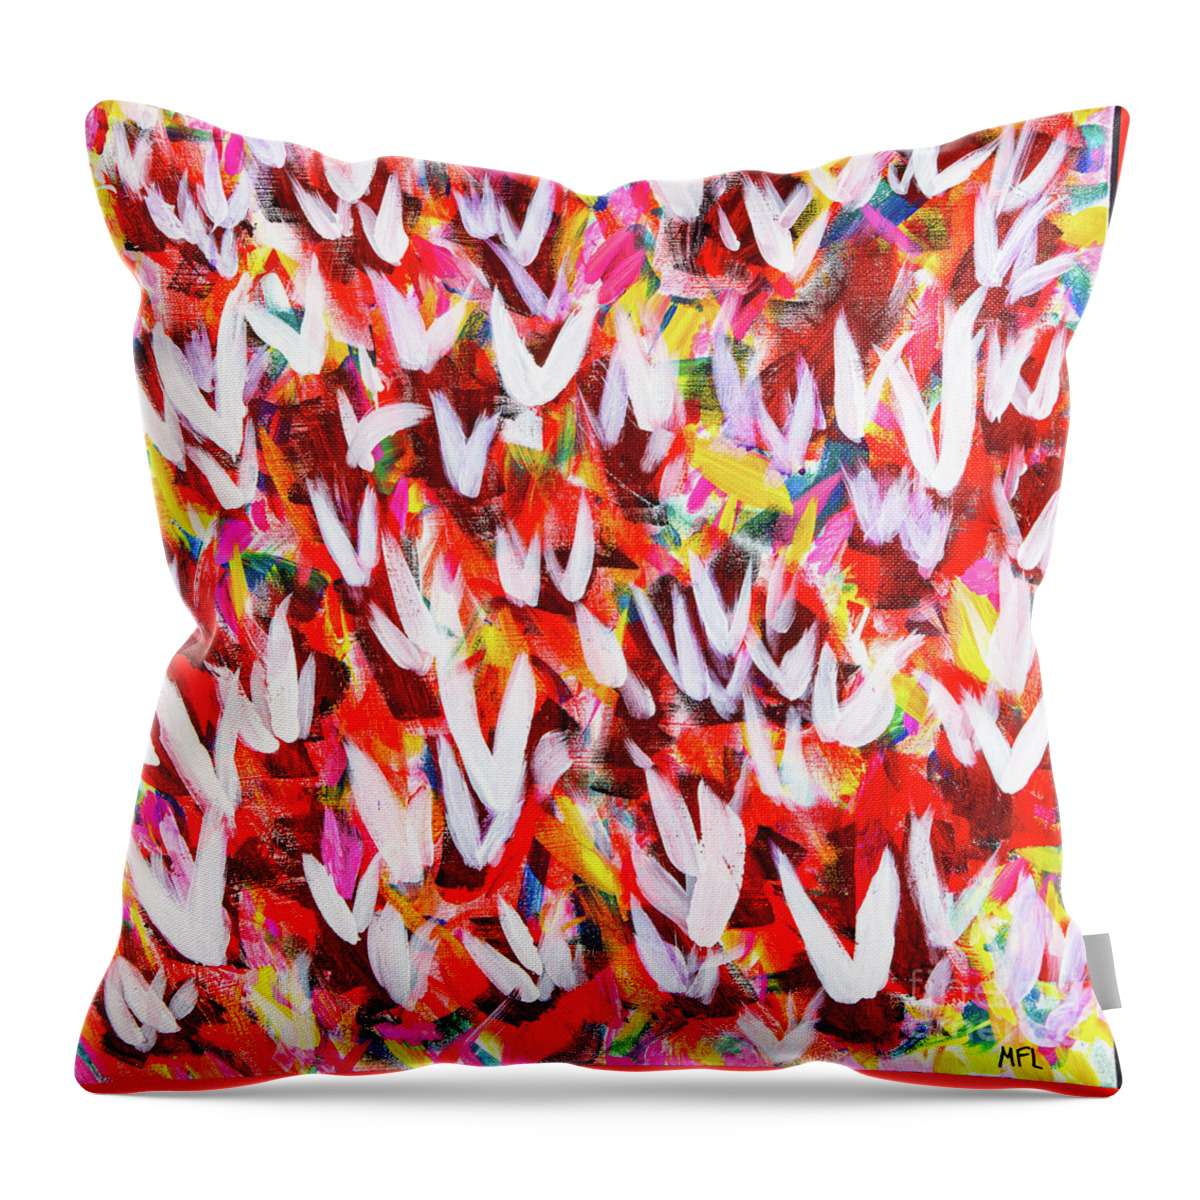 Abstract Throw Pillow featuring the digital art Flight Of The White Doves - Colorful Abstract Contemporary Acrylic Painting by Sambel Pedes